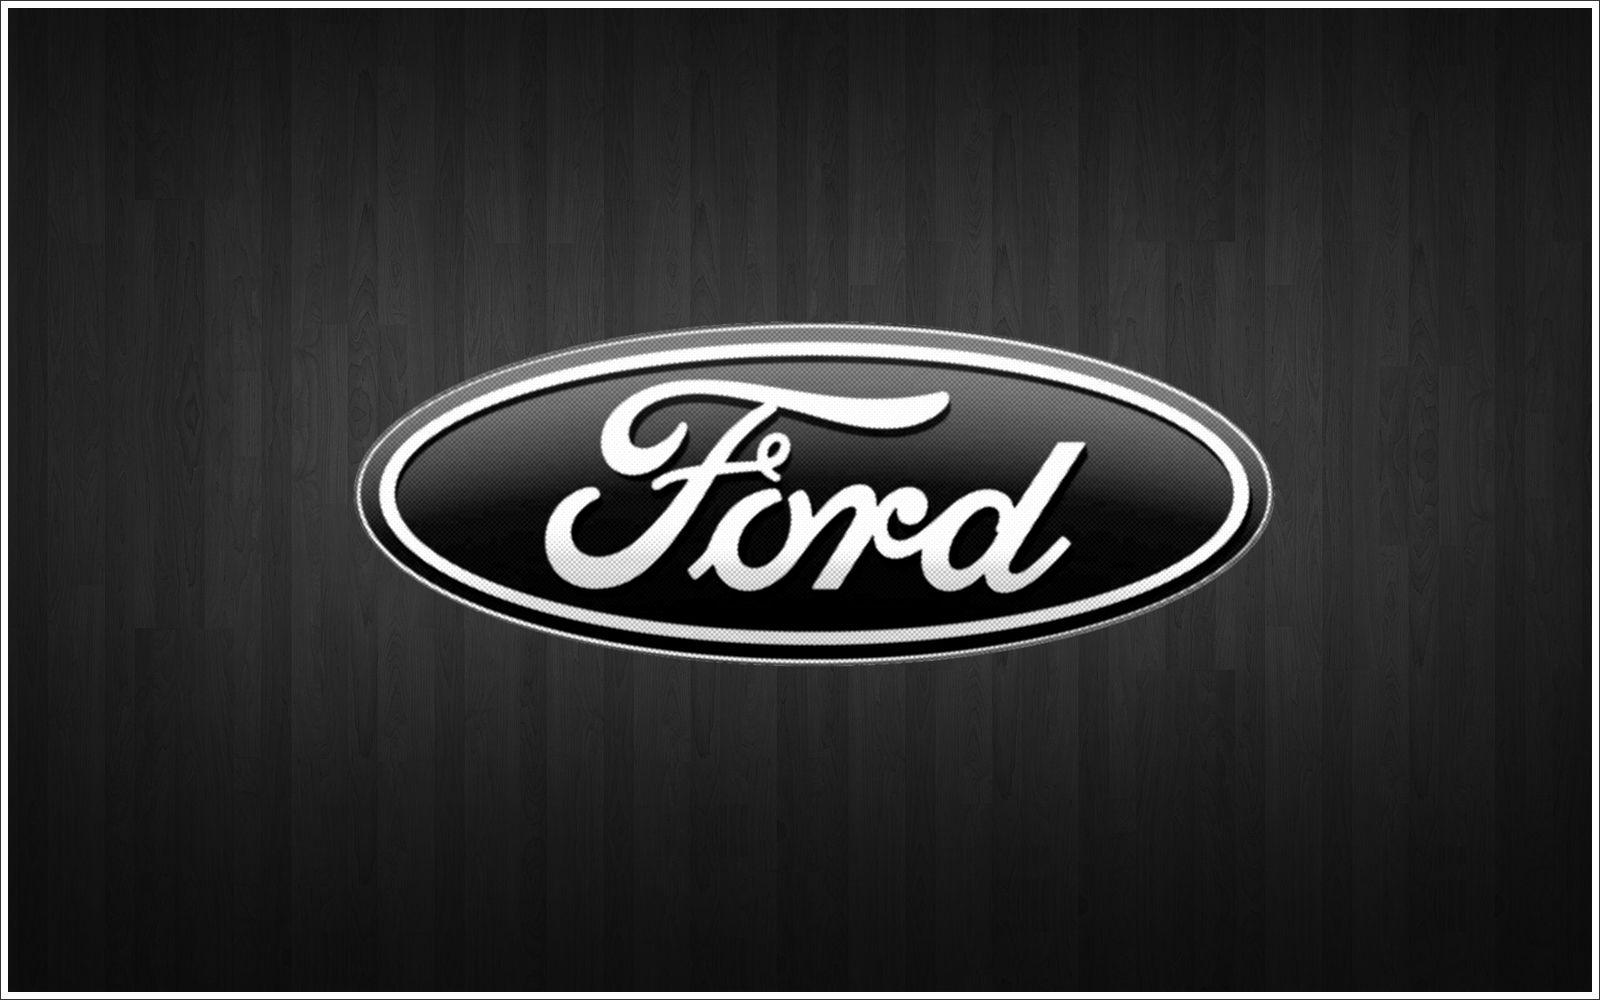 New Ford Motor Logo - Ford Logo Meaning and History, latest models | World Cars Brands